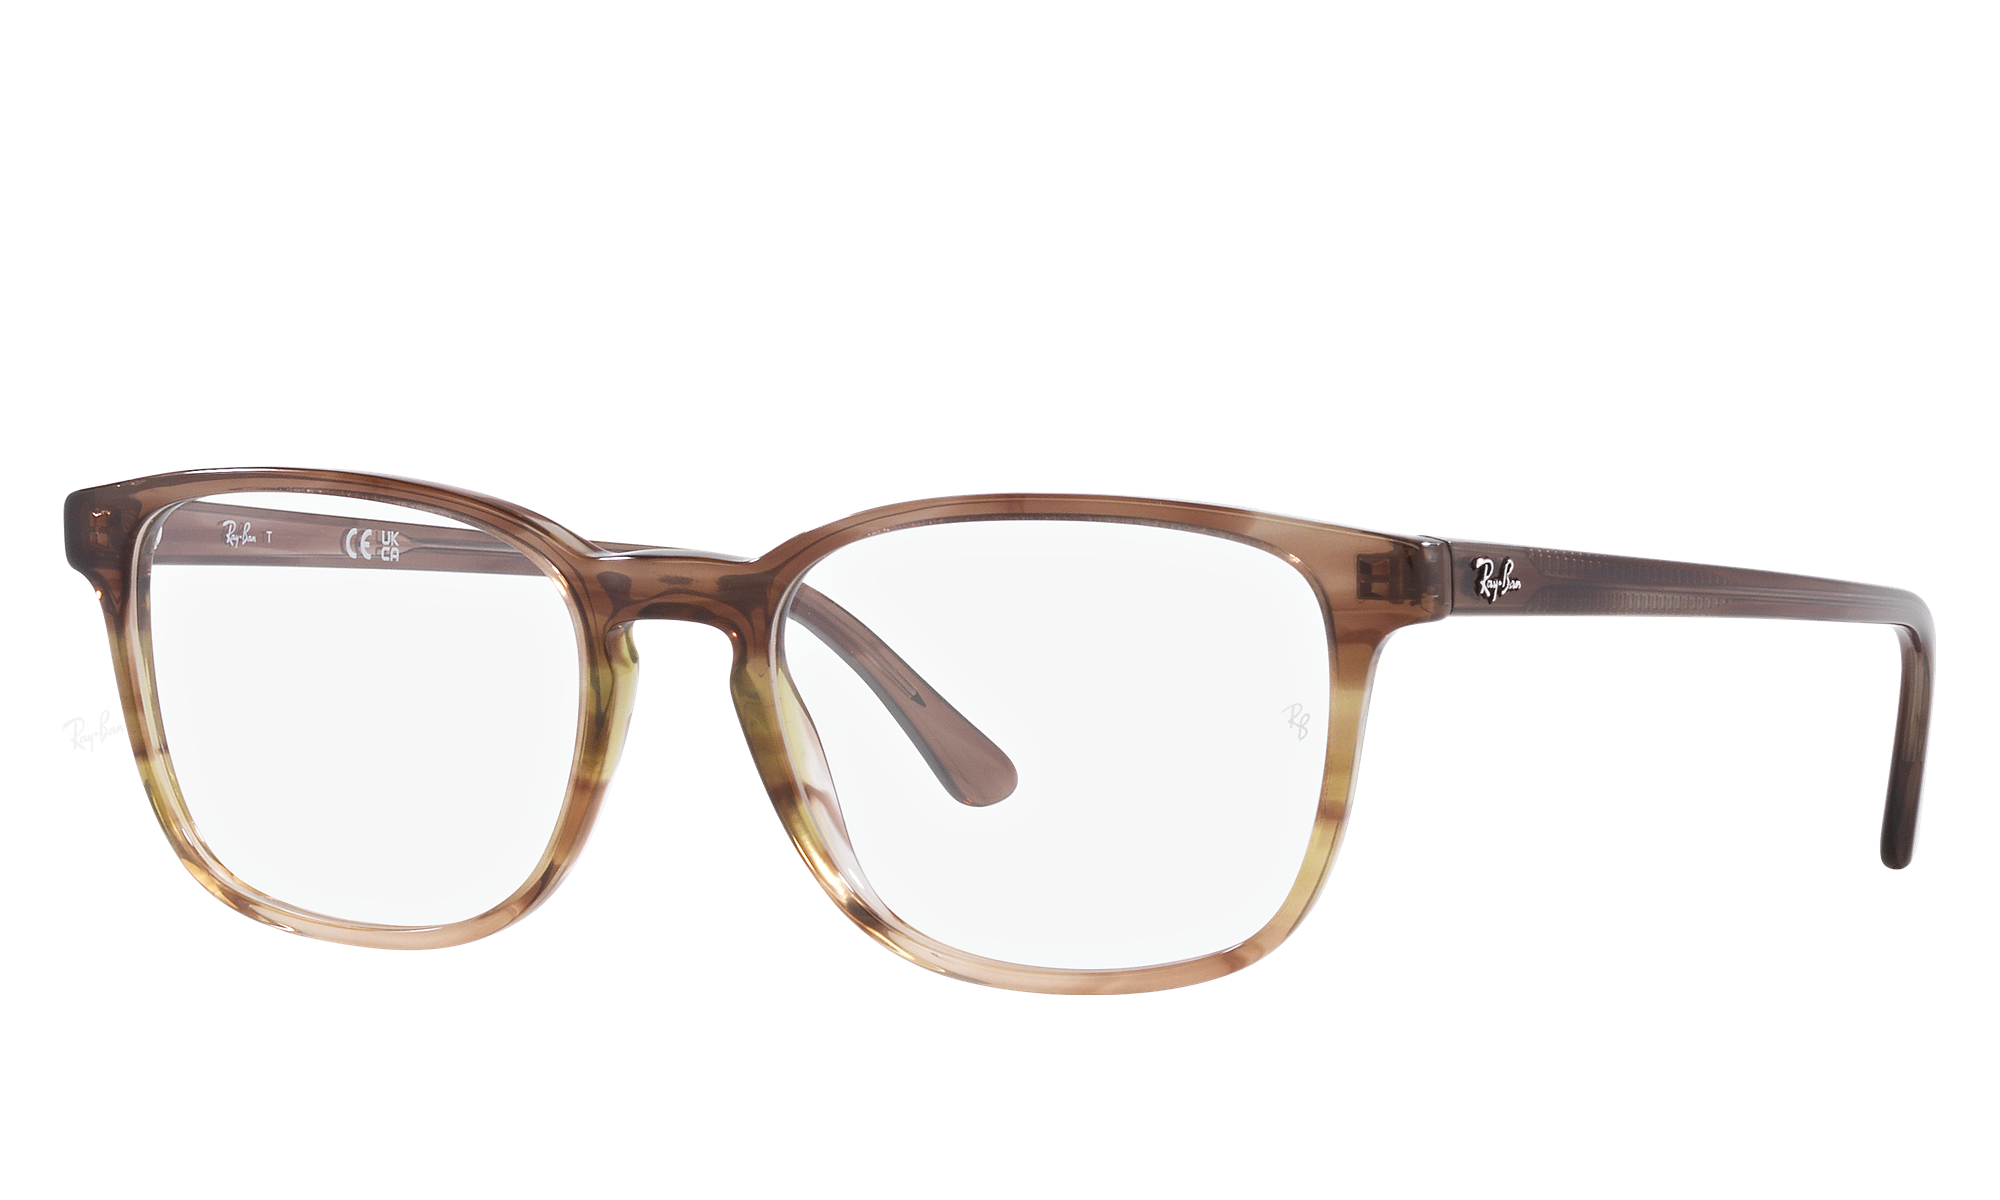 Ray-Ban Unisex Rx5418 Striped Brown & Green Size: Large